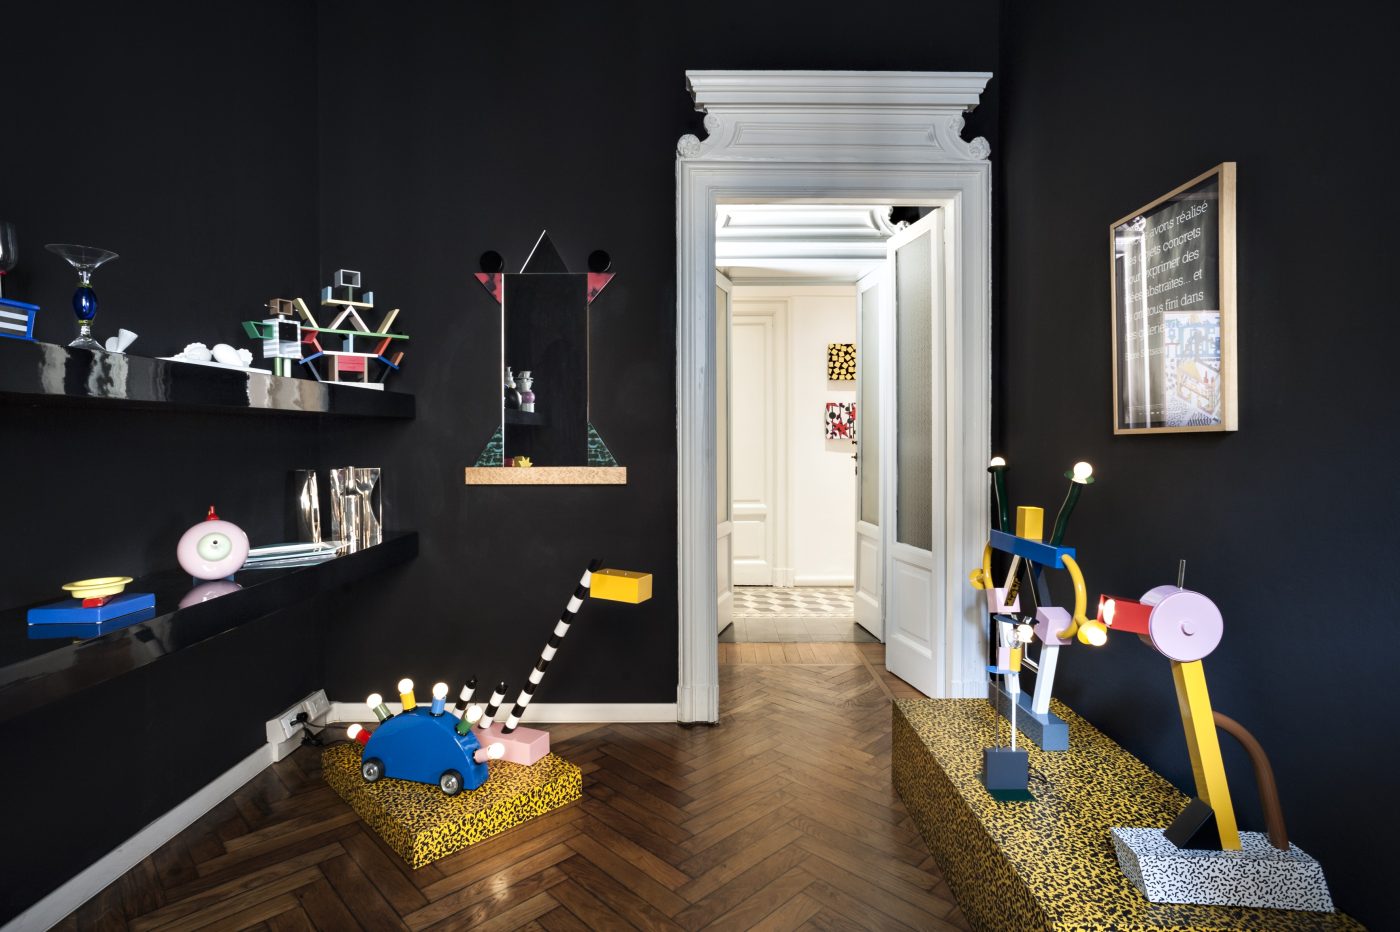 Lamps lighting up a room in the Memphis|Post Design Gallery